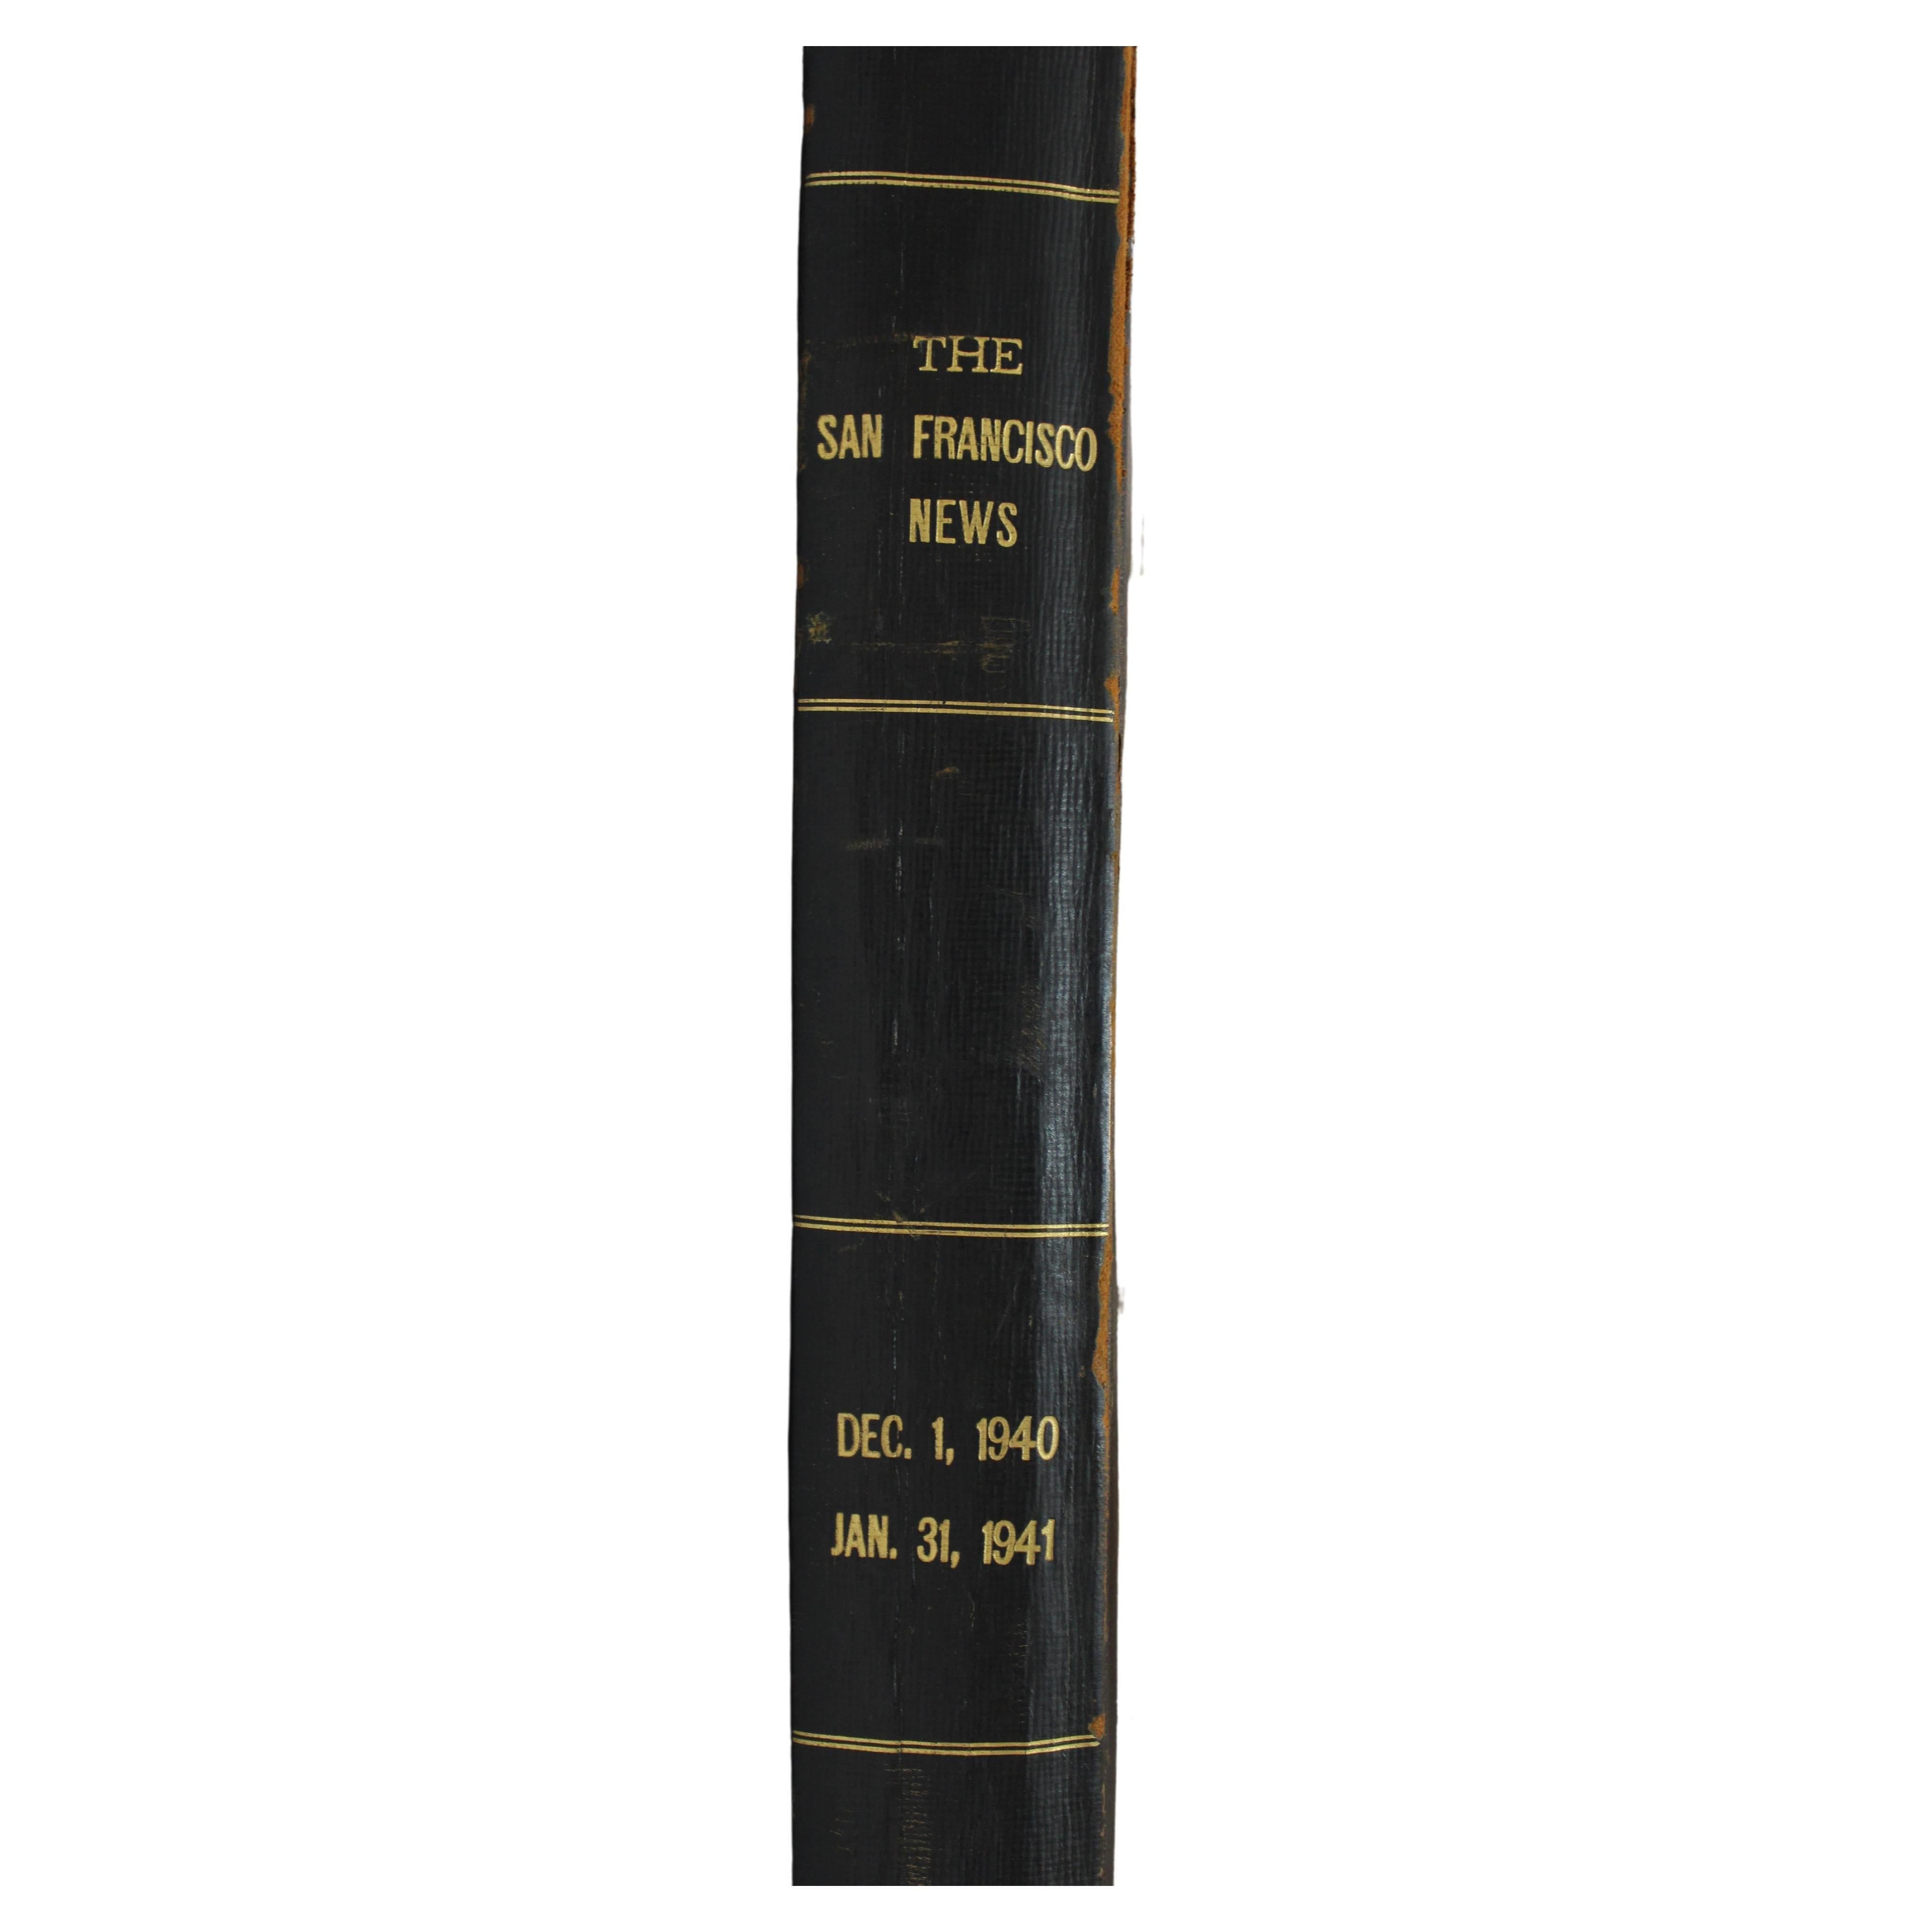 Leather Bound Volume of the San Francisco News, 1940-41